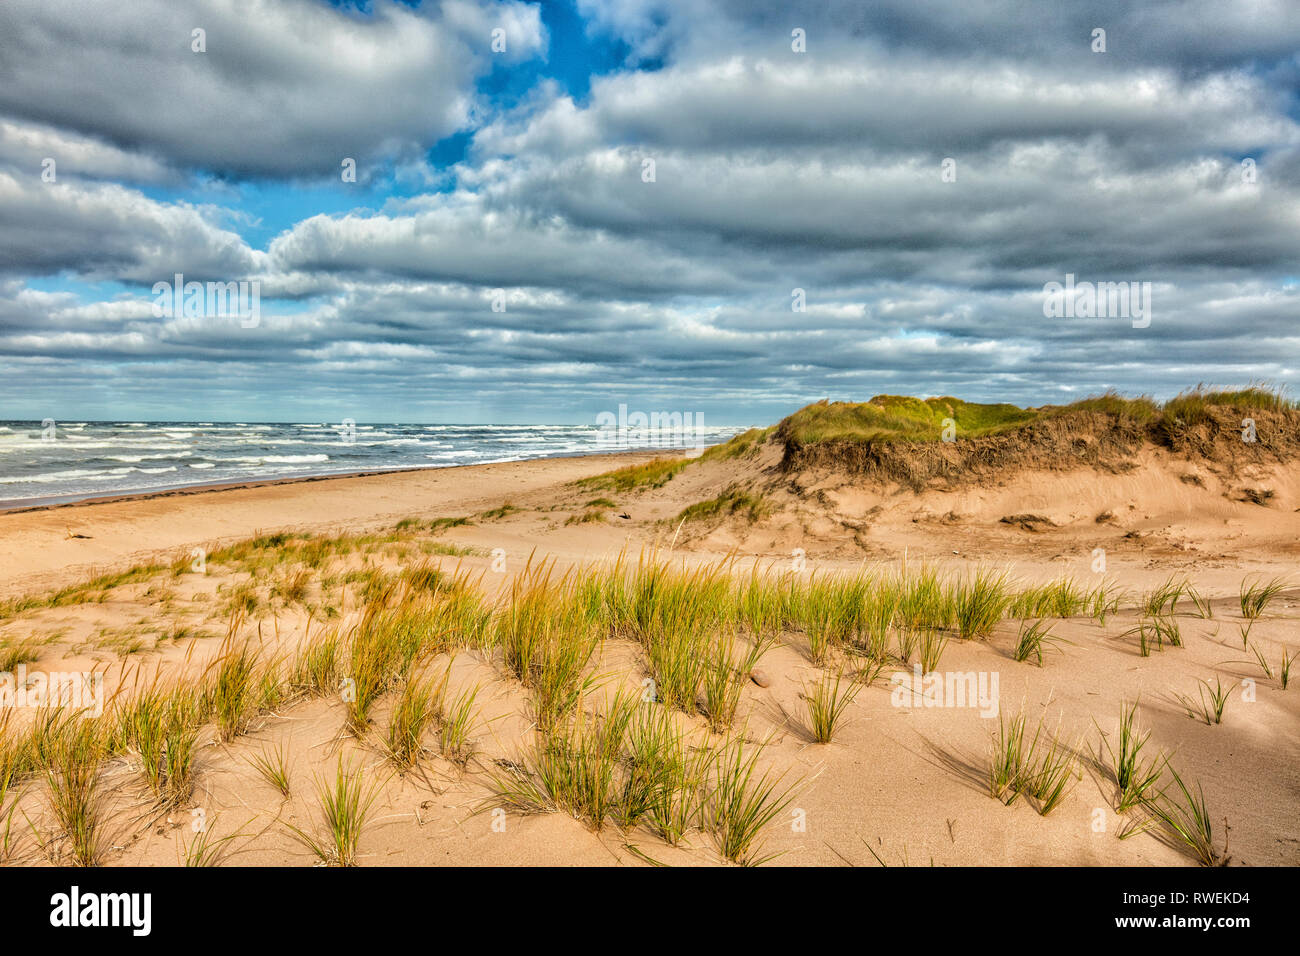 Blooming Point Beach, Prince Edward Island, Parc National, Canada Banque D'Images